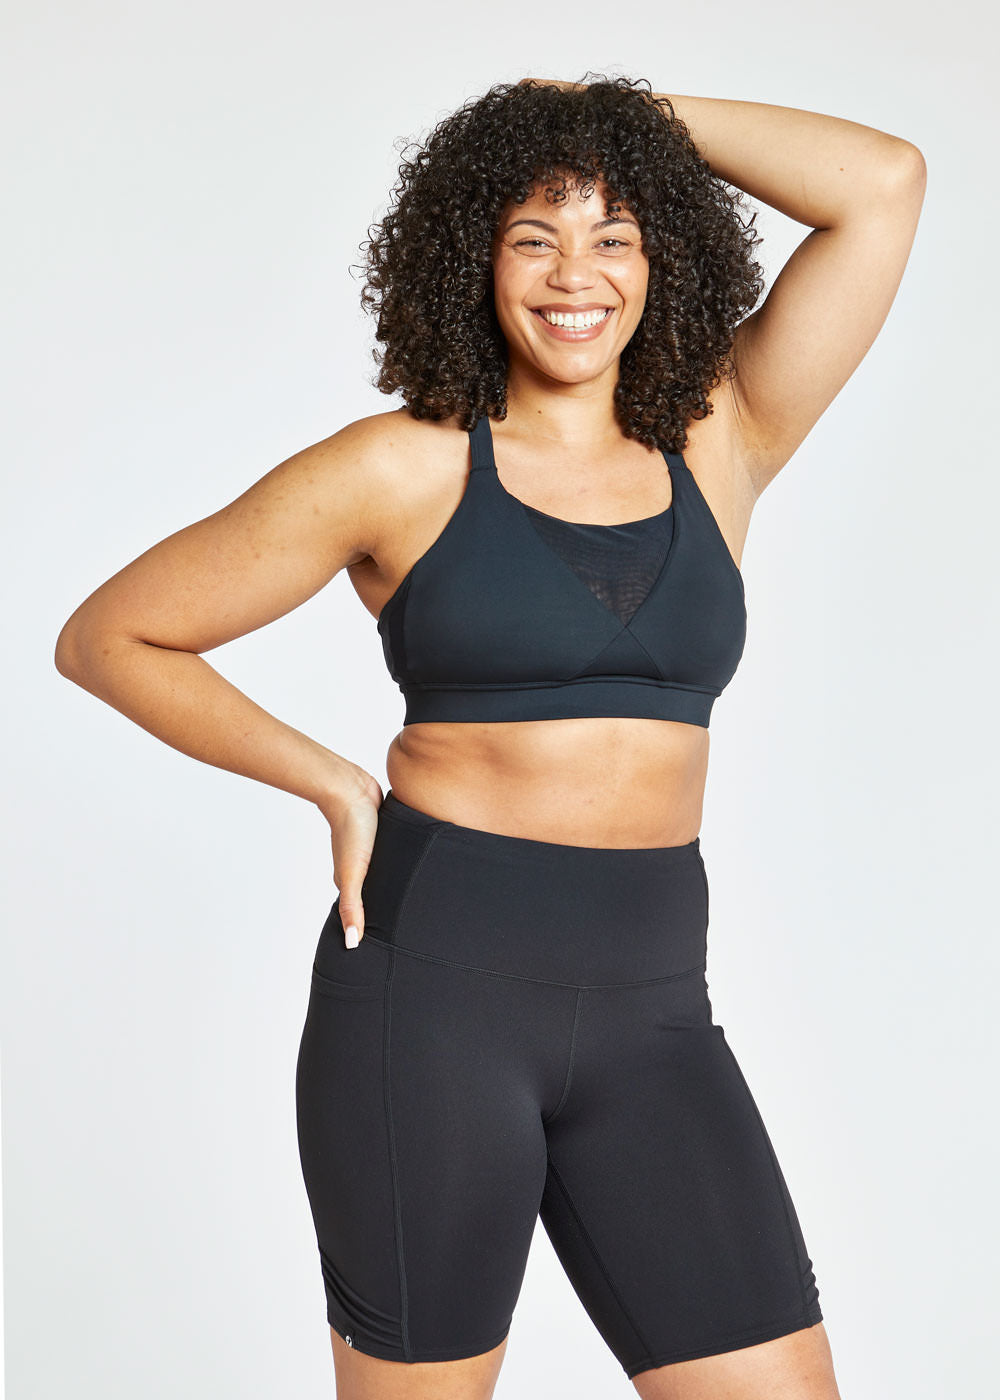 ⚡️Oiselle Pockito Bra⚡️  She has something to SMILE 😊 about